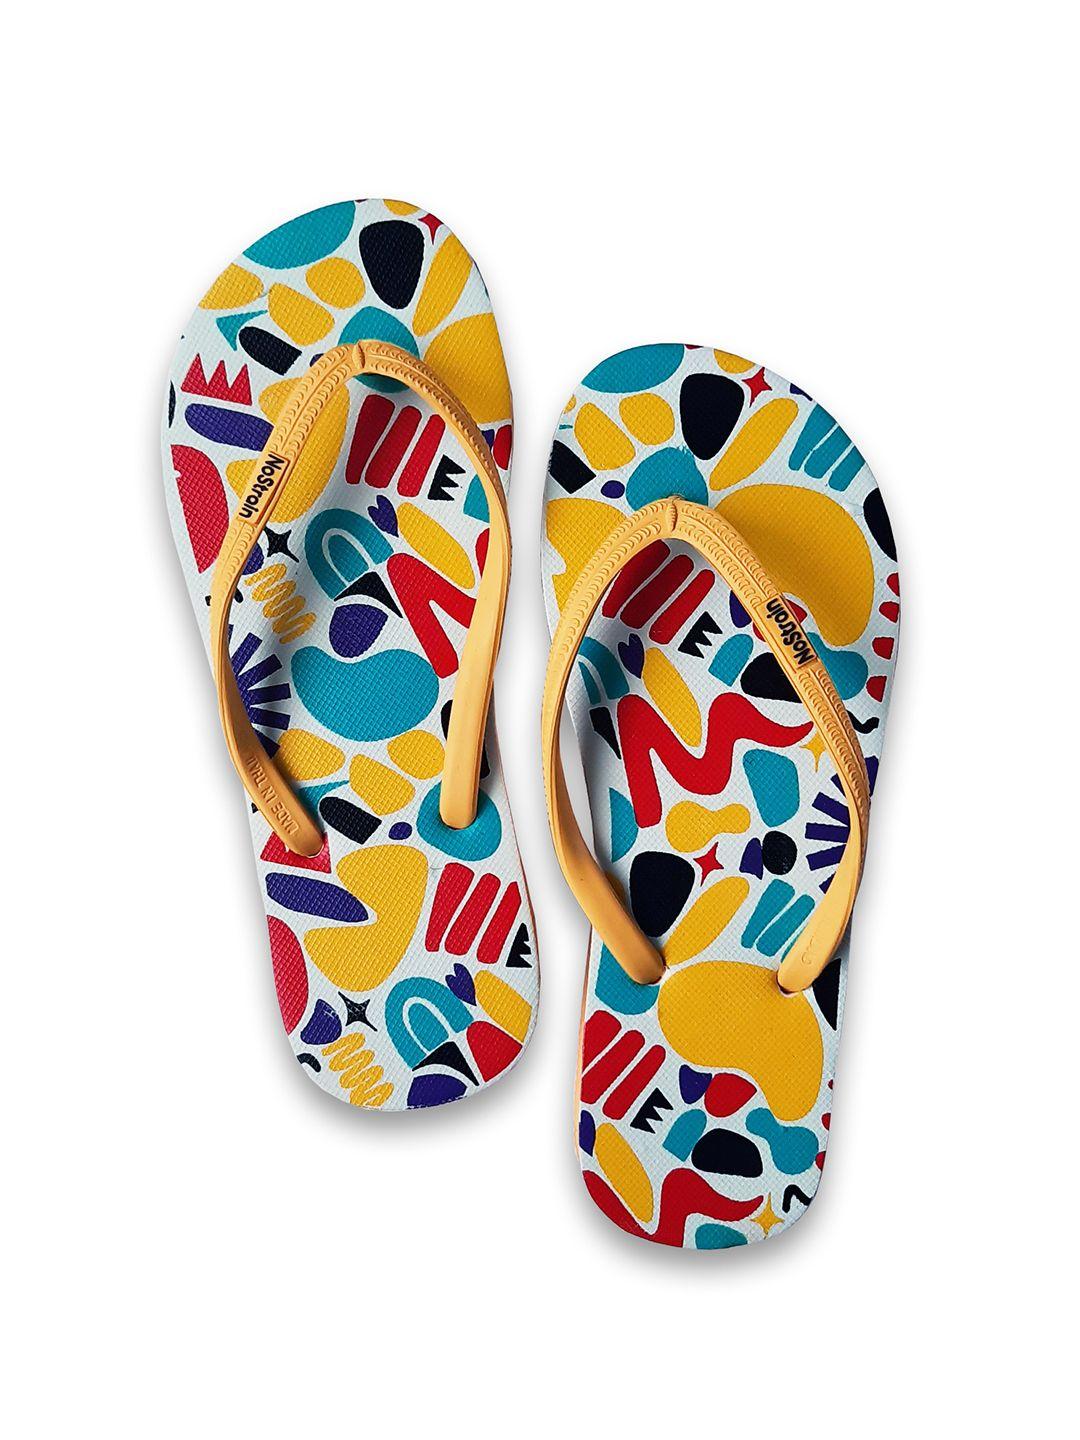 nostrain men yellow & blue printed rubber room slippers